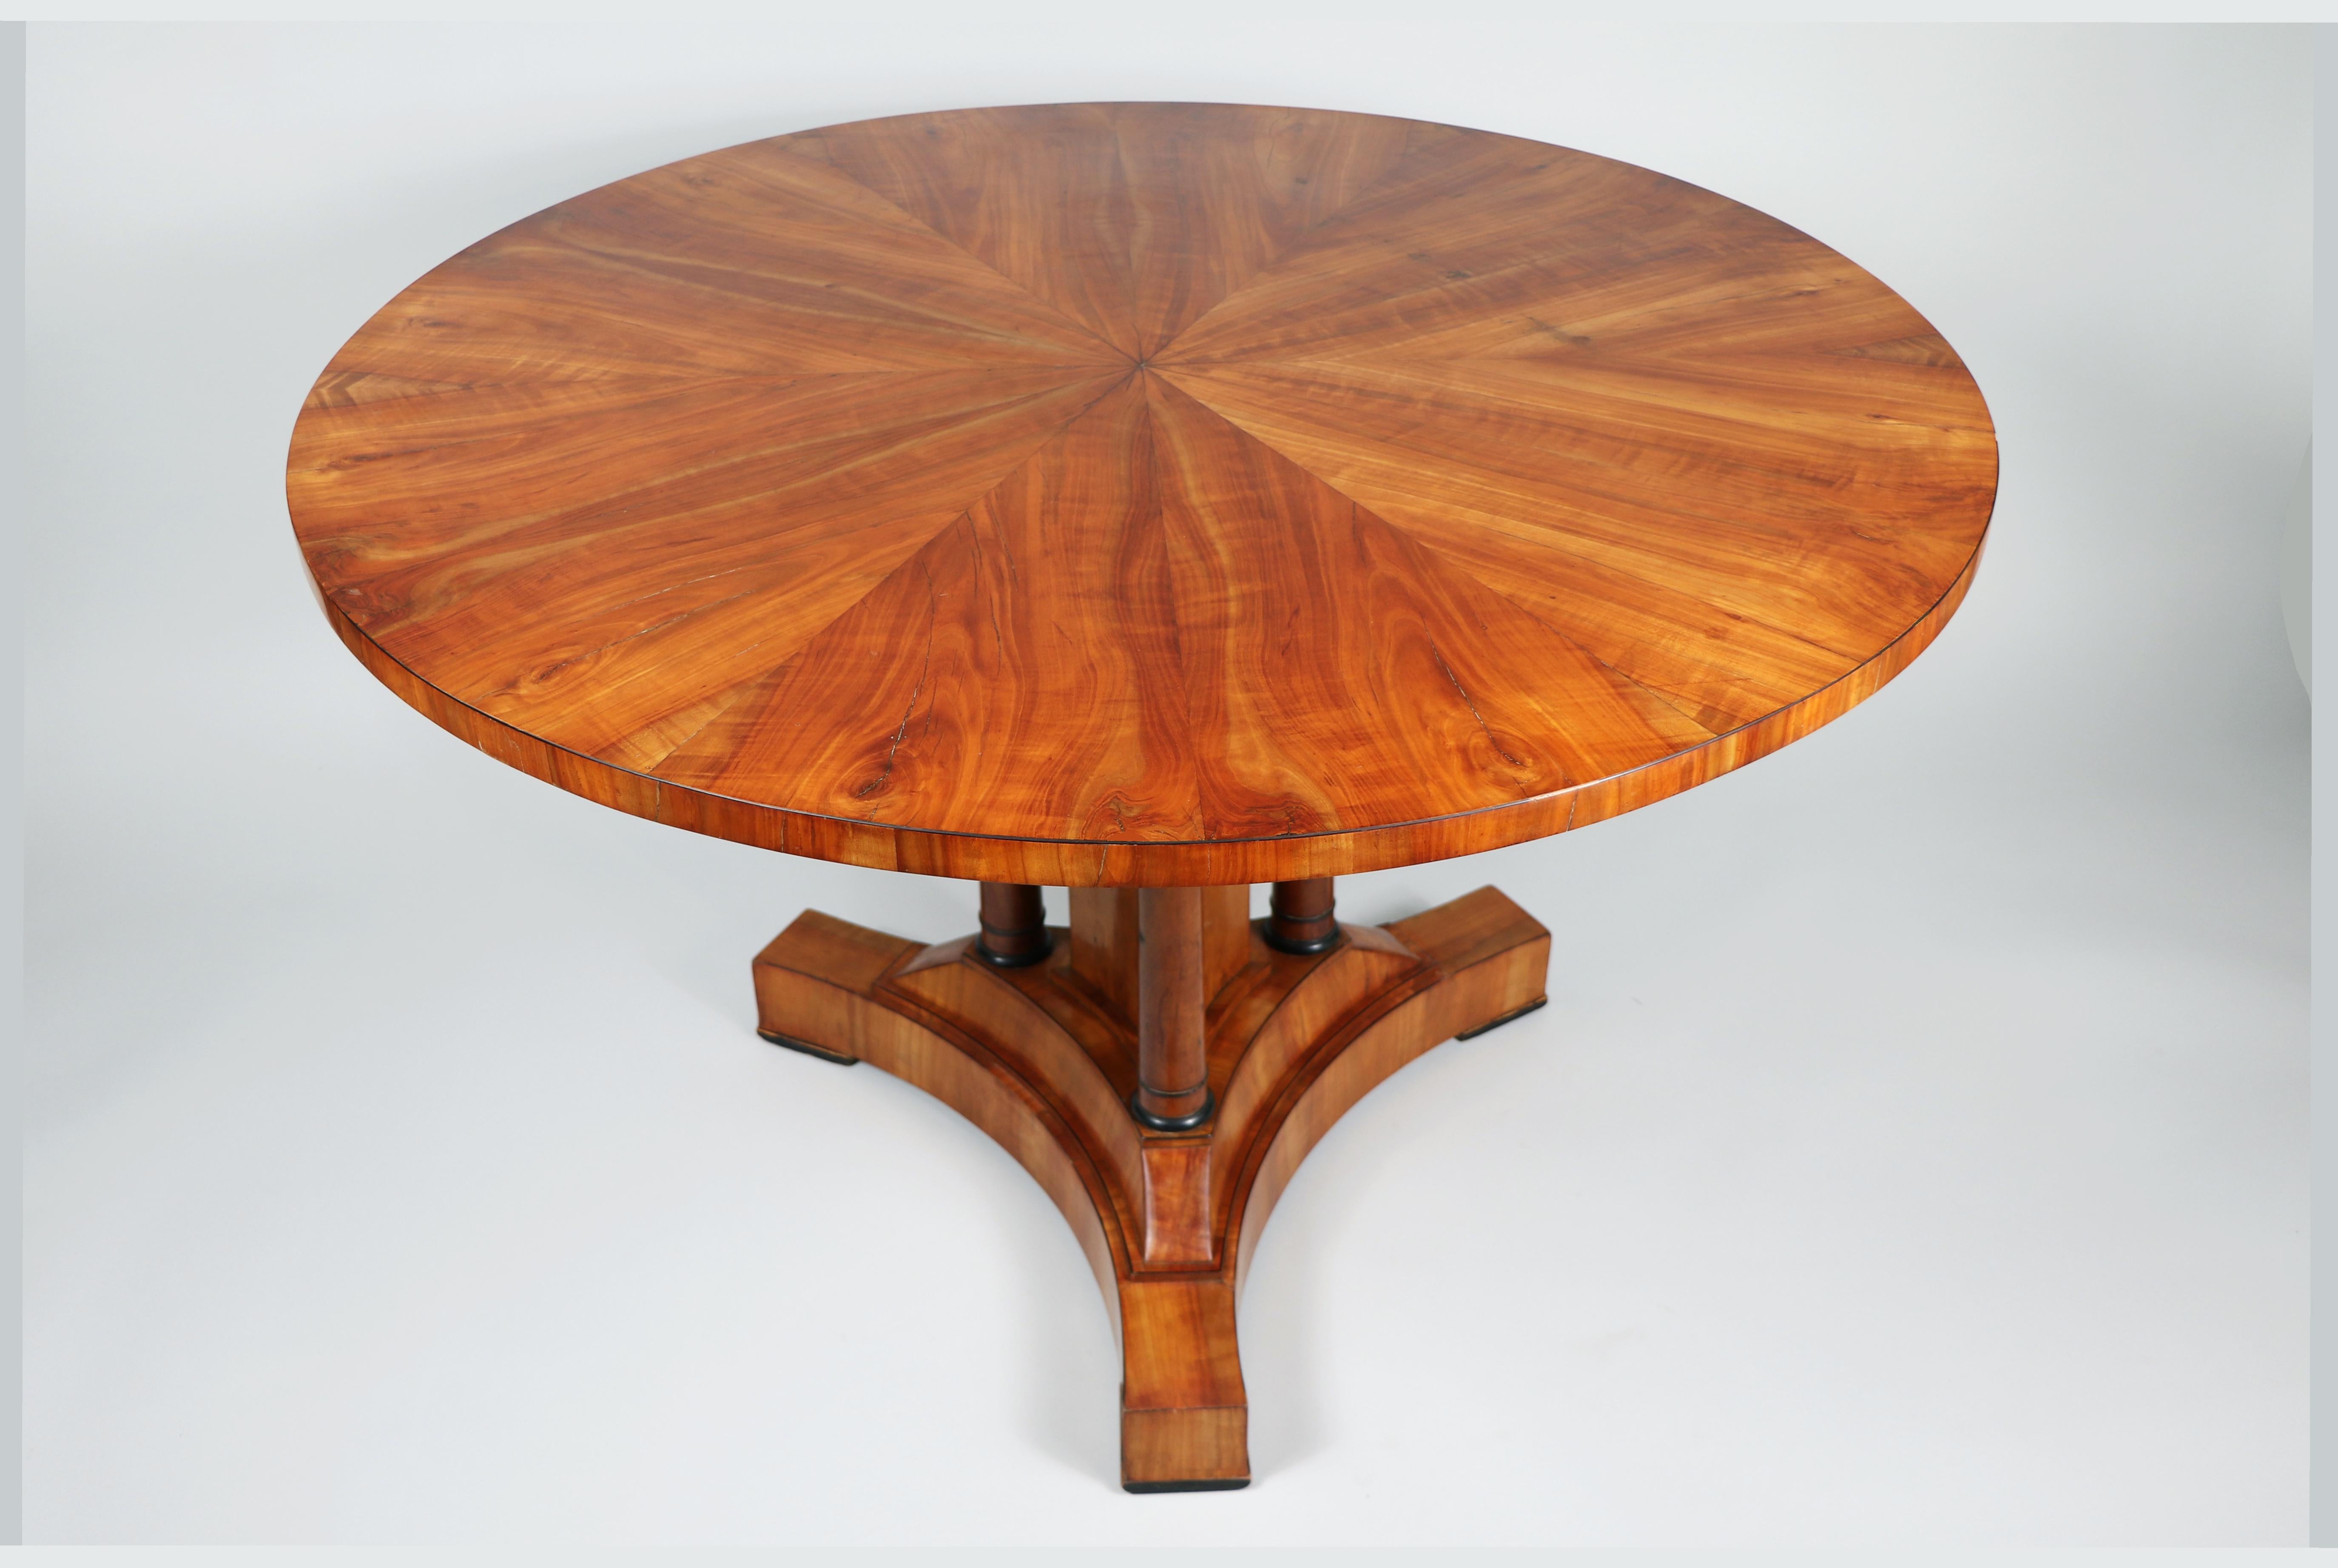 Hello,
This exceptional, large Biedermeier cherry table was made circa 1825-30 in Vienna.

Viennese Biedermeier pieces are distinguished by their sophisticated proportions, rare and refined design, excellent craftsmanship and continue to have a